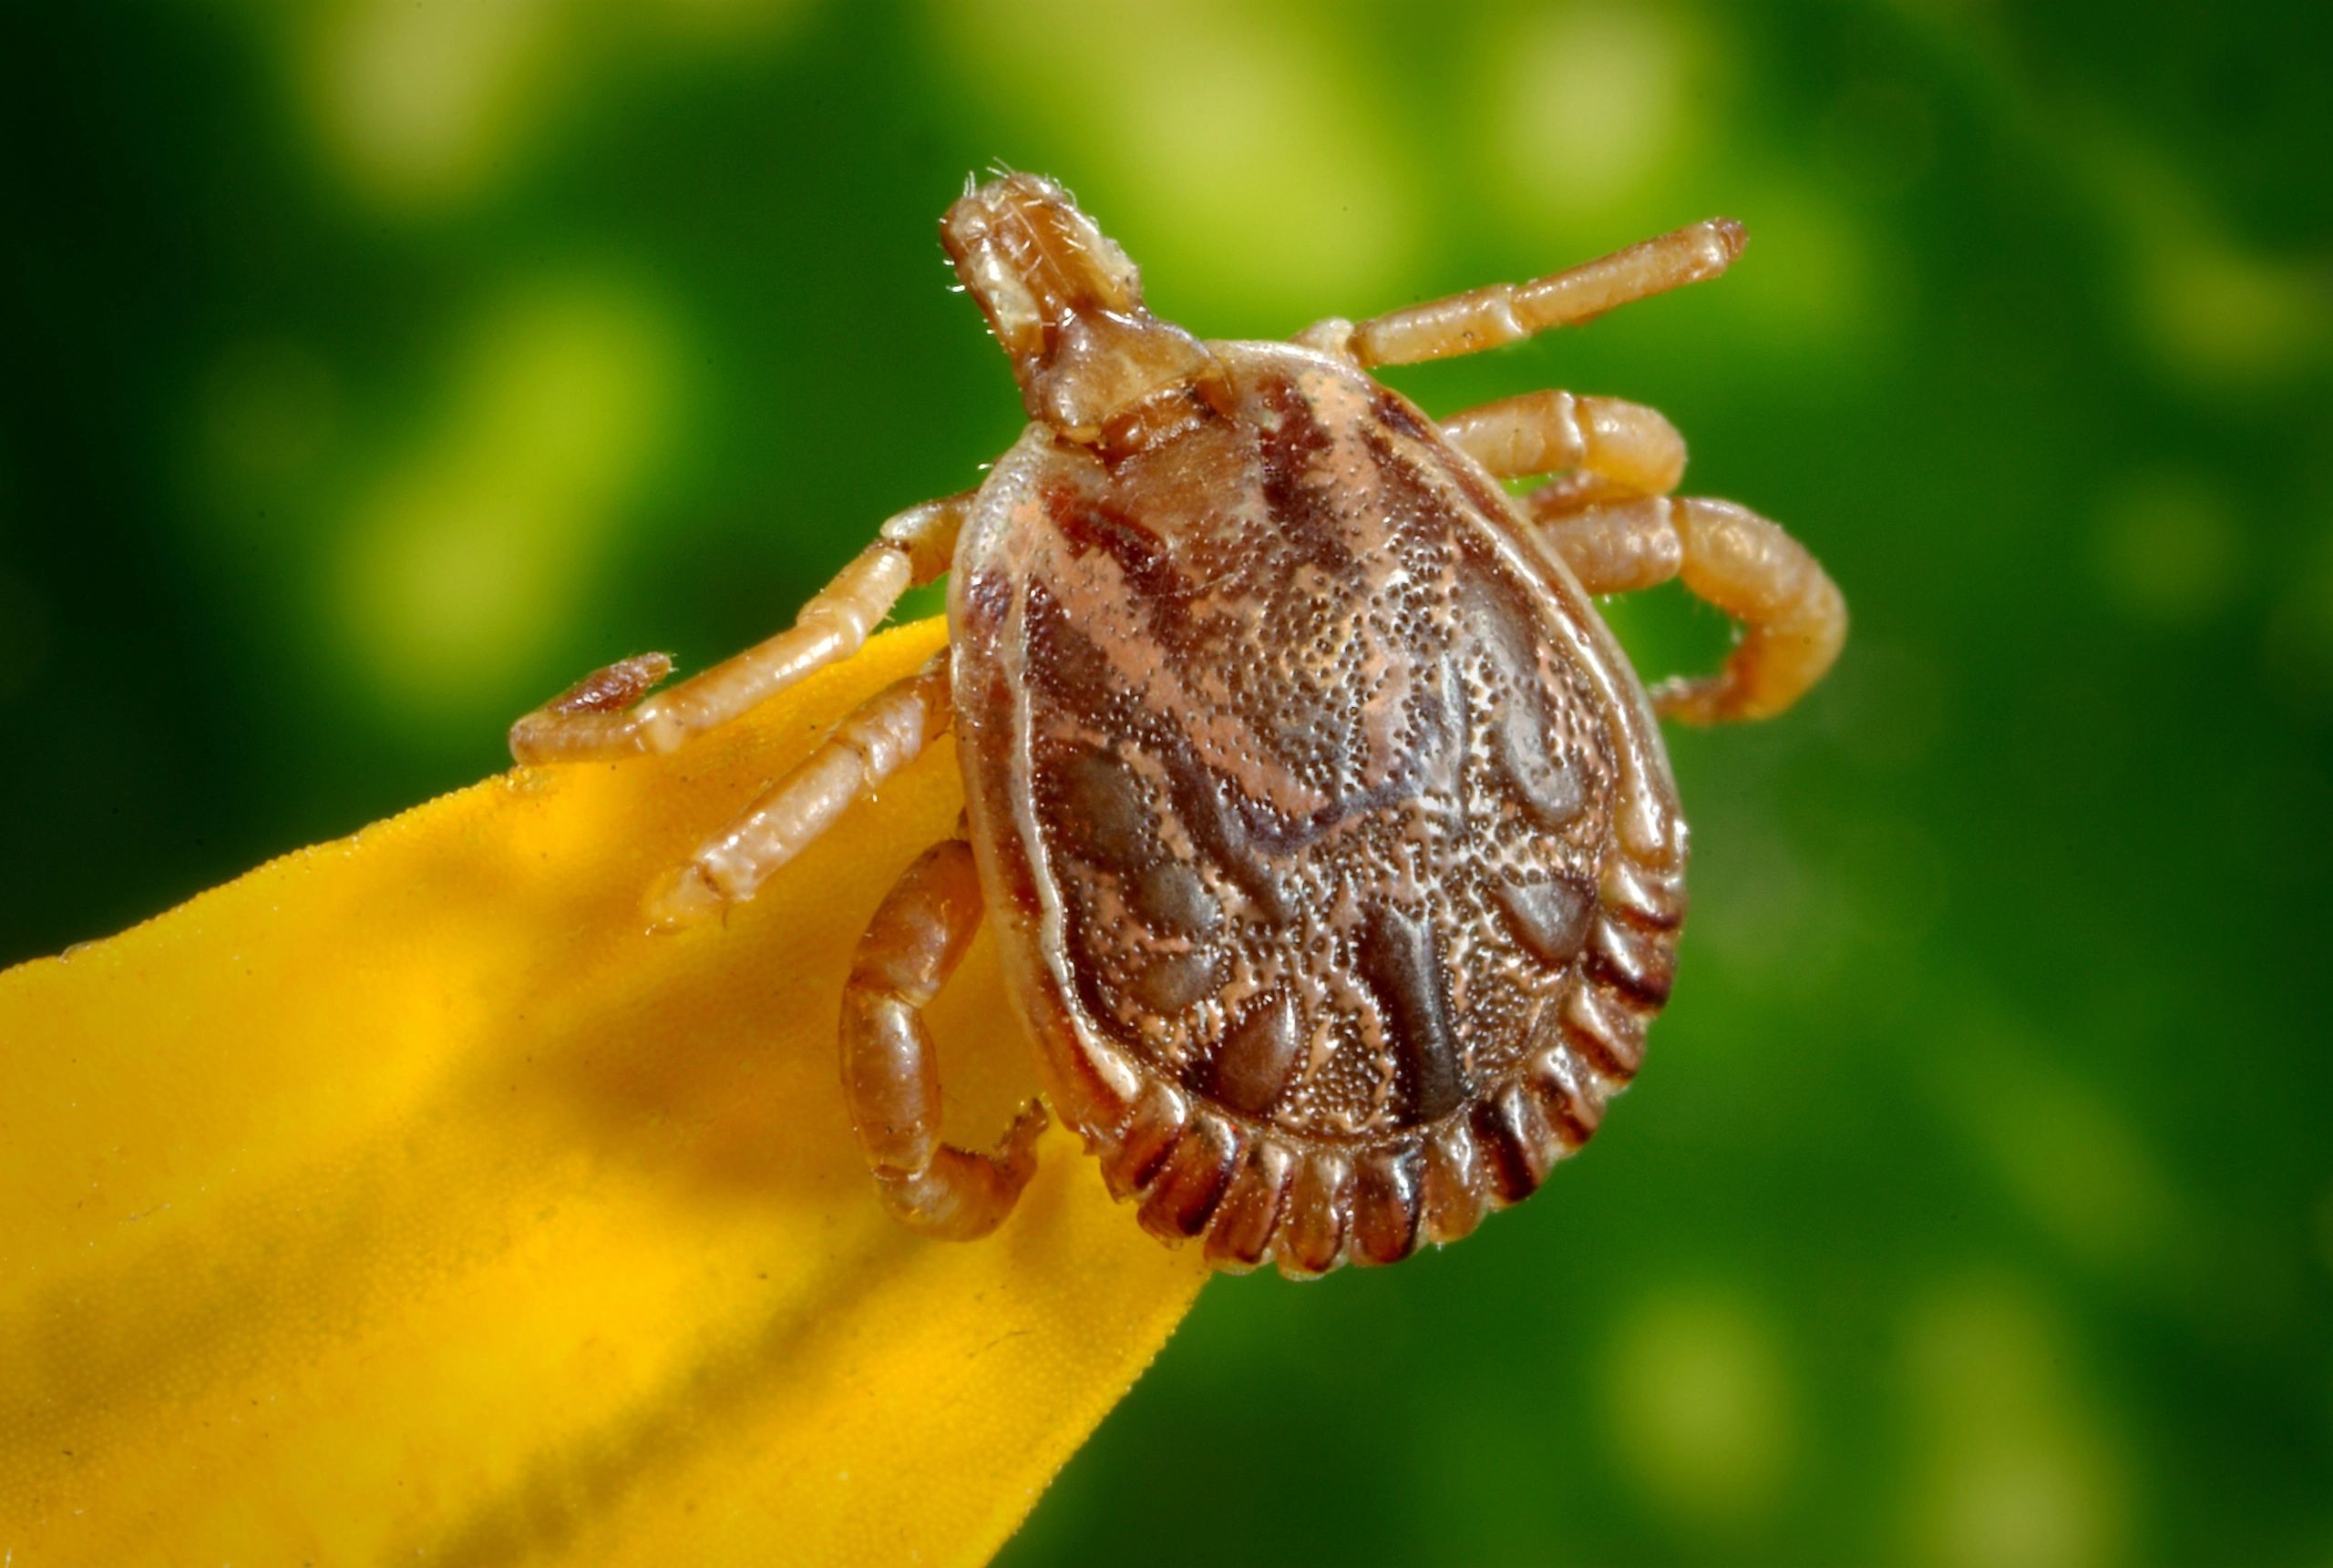 Brown tick with six legs, small head, and large hard shell on yellow foliage with green background